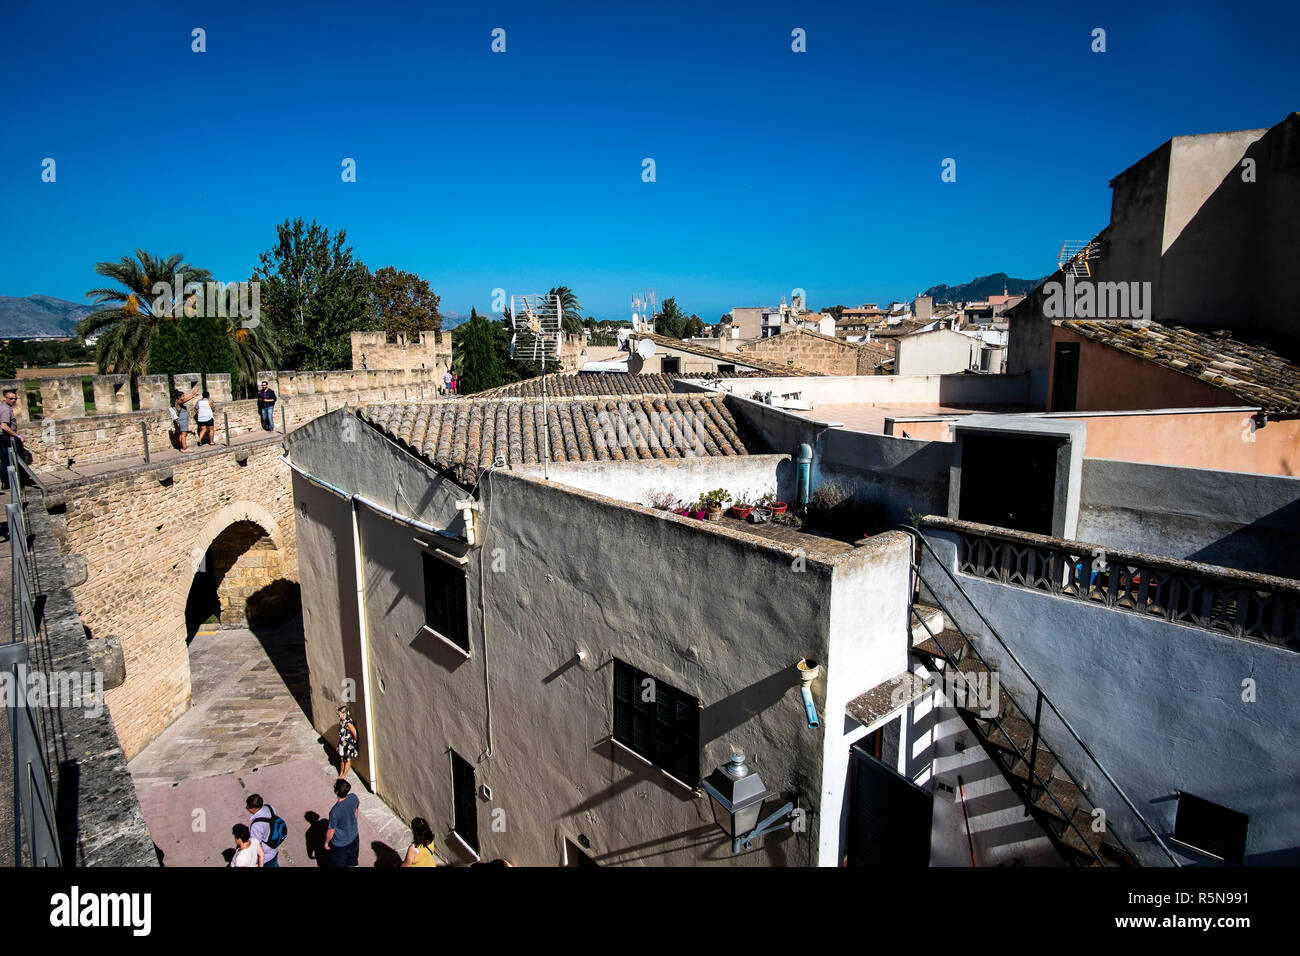 A view of the old town and town walls in Alcudia, Mallorca Stock Photo